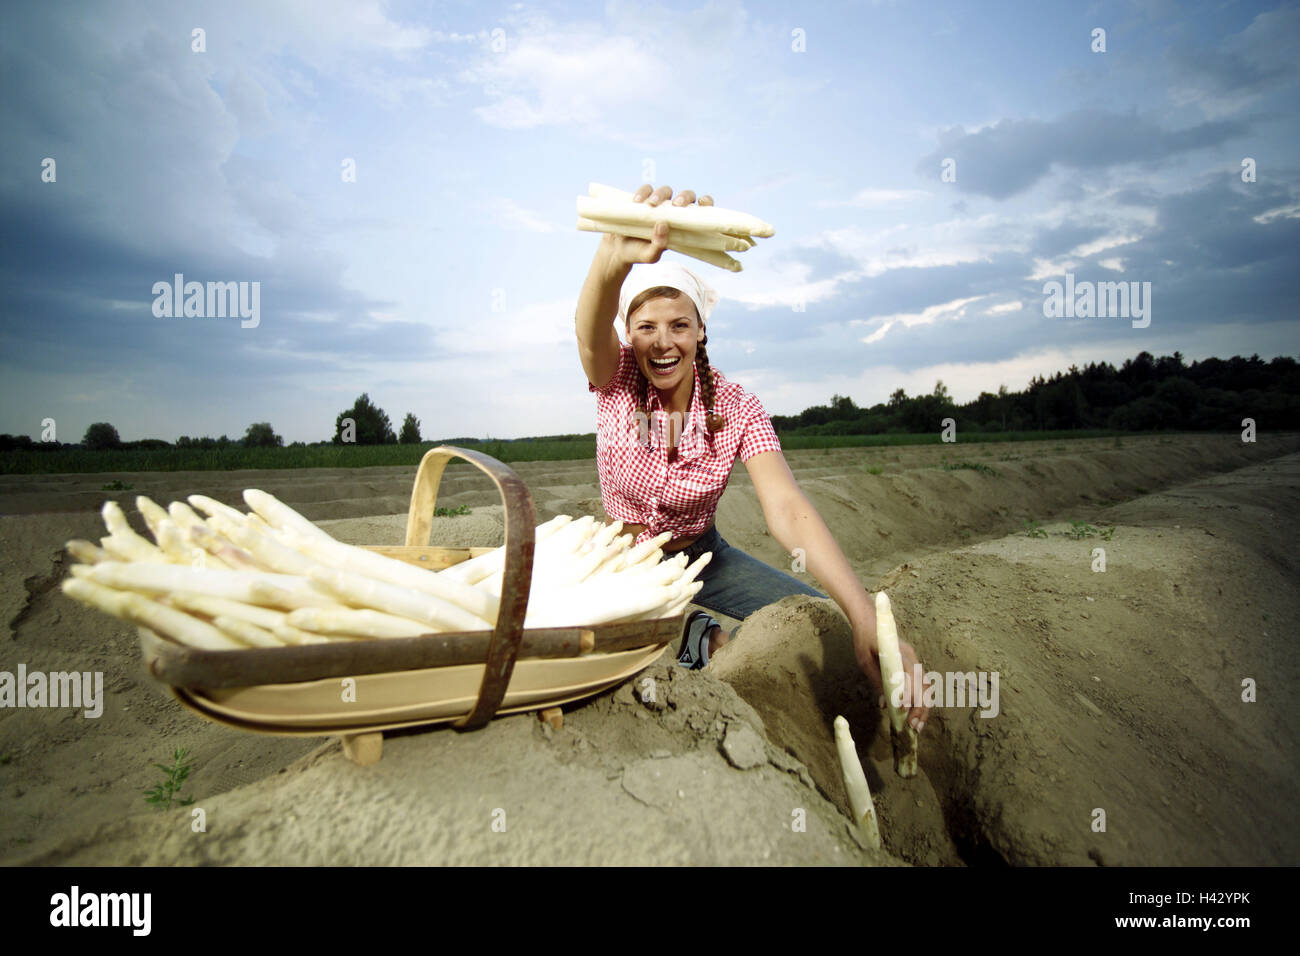 Asparagus field, woman, young, asparagus, harvest field, asparagus cultivation, agriculture, country living, vegetables, vegetable-growing, cultivation, land life, farmer, harvest, yield, asparagus harvest, asparagus sticks, basket, sting, vegetable asparagi, work, ground, earthworks, happy, smile, kneel, hold up, joy, headscarf, headgear Stock Photo